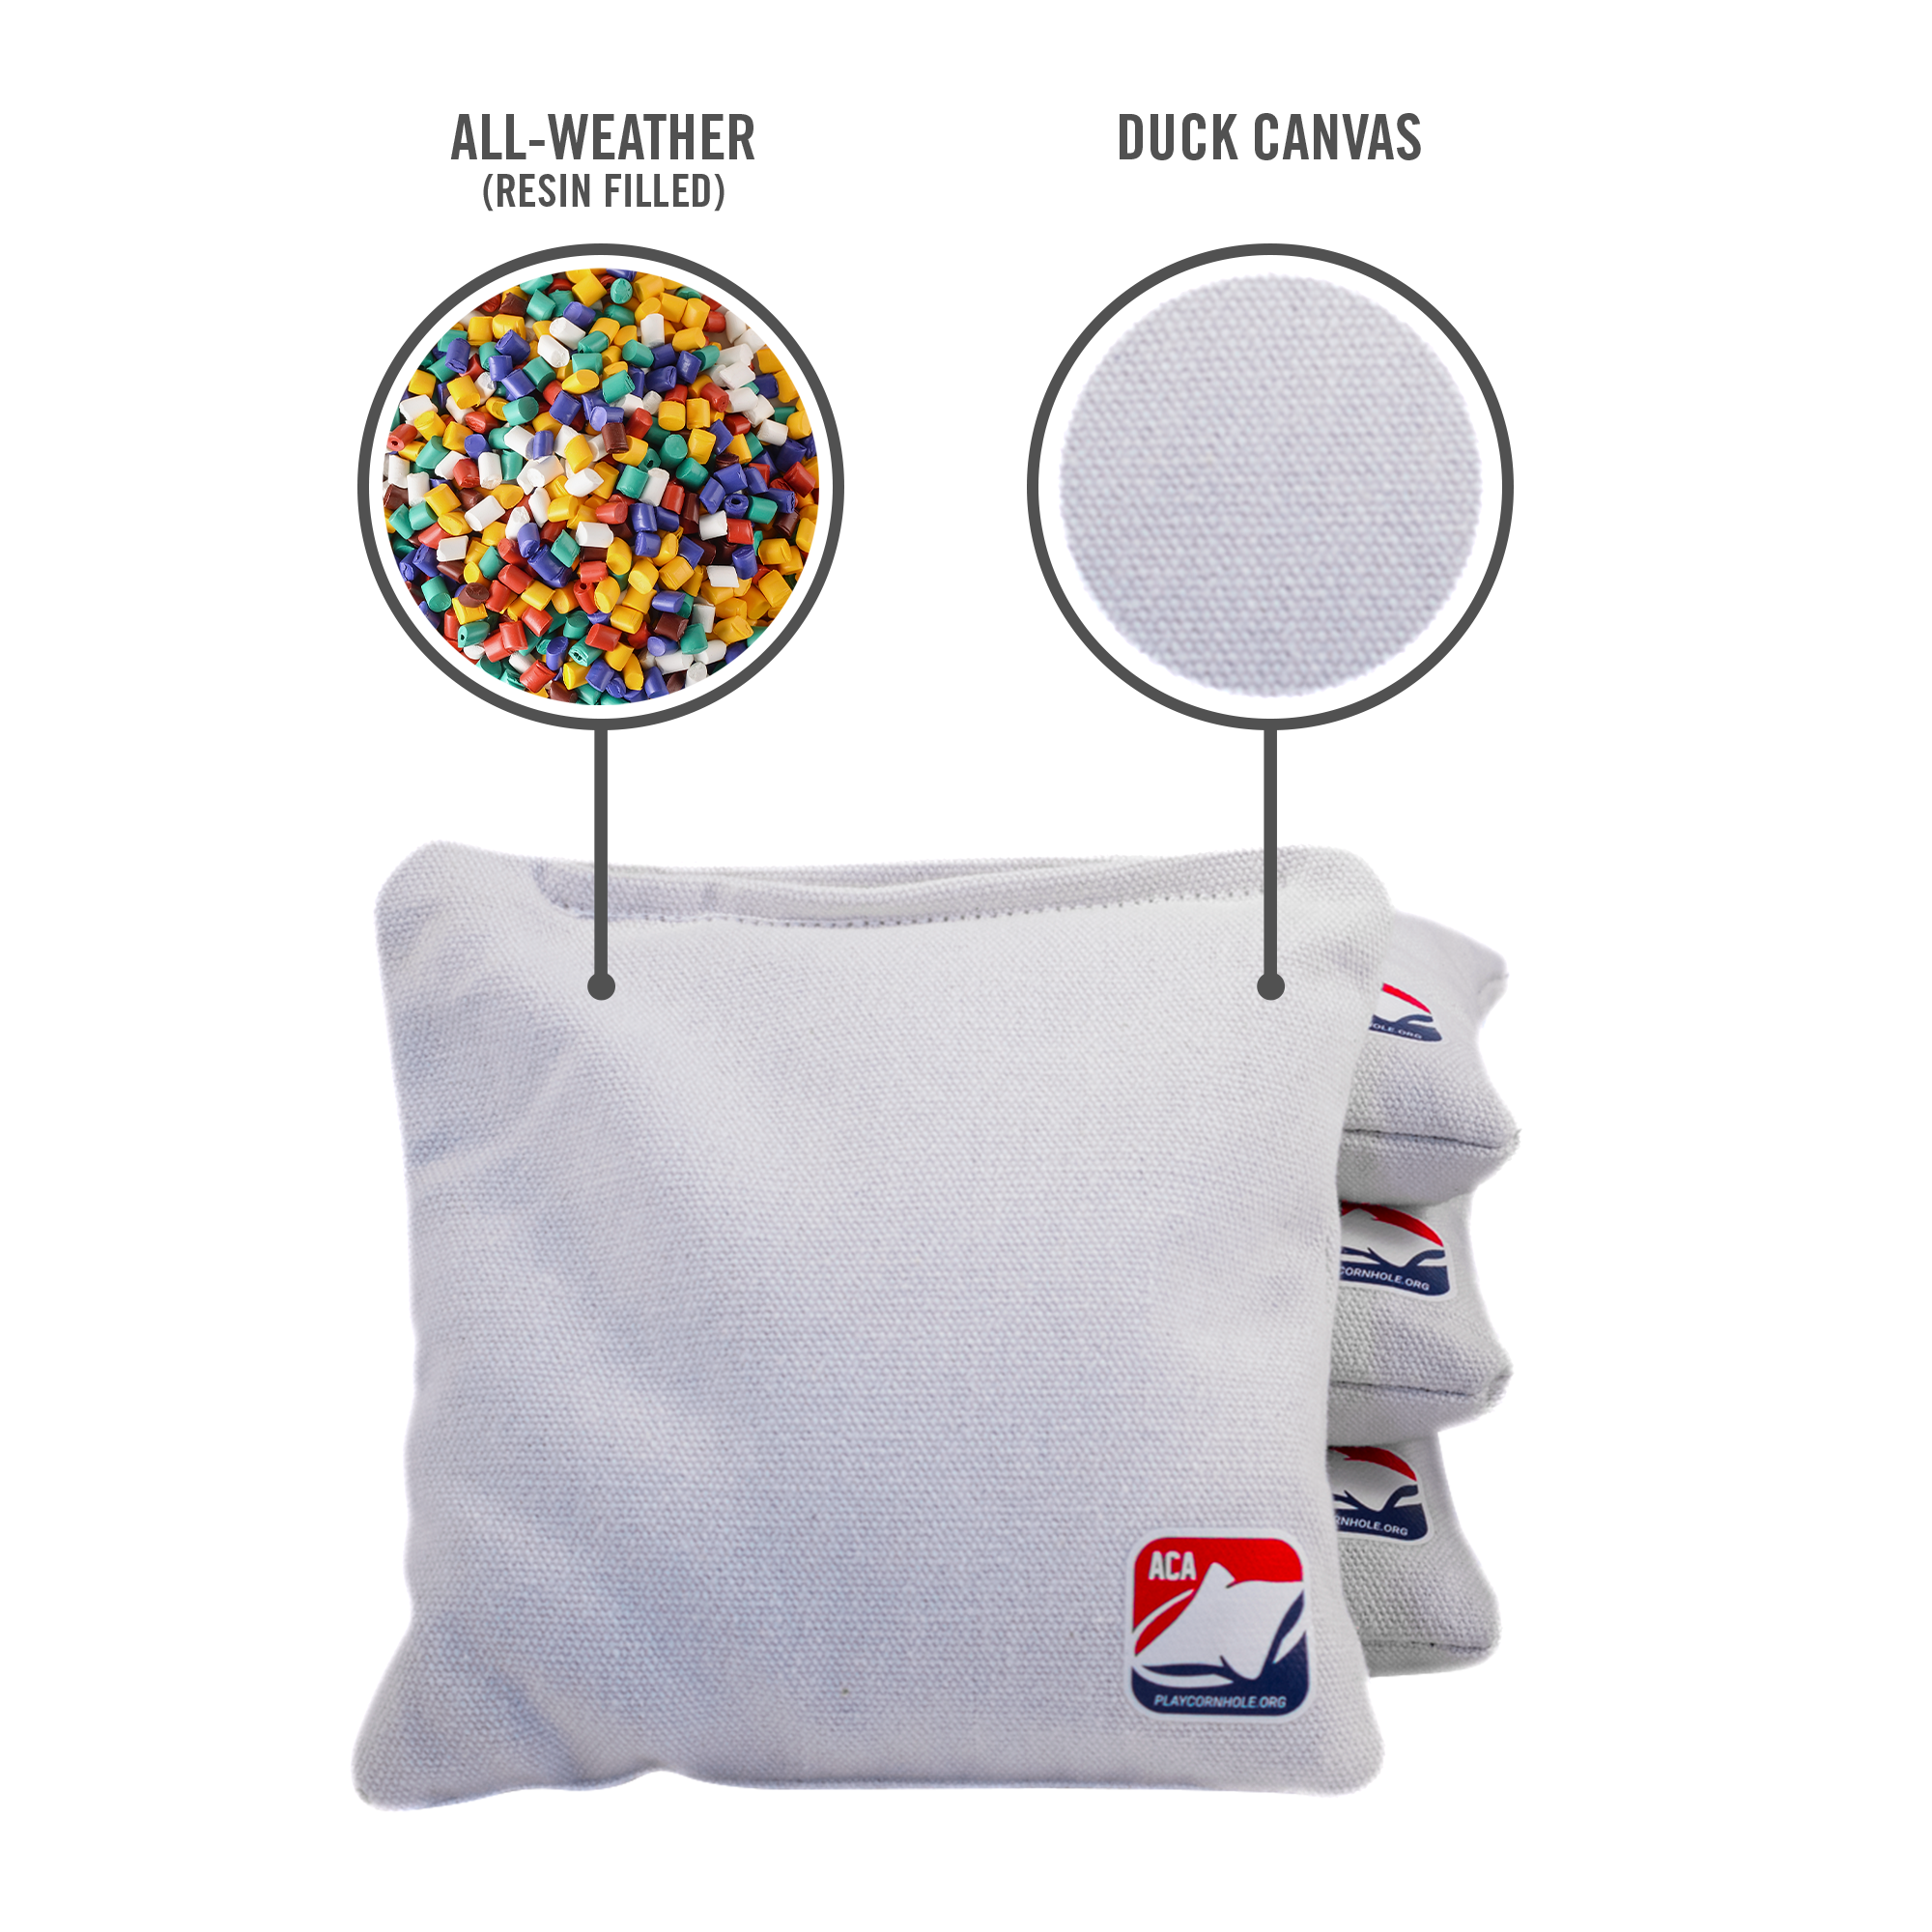 6-in Daily 66x White Competition Regulation Cornhole Bags